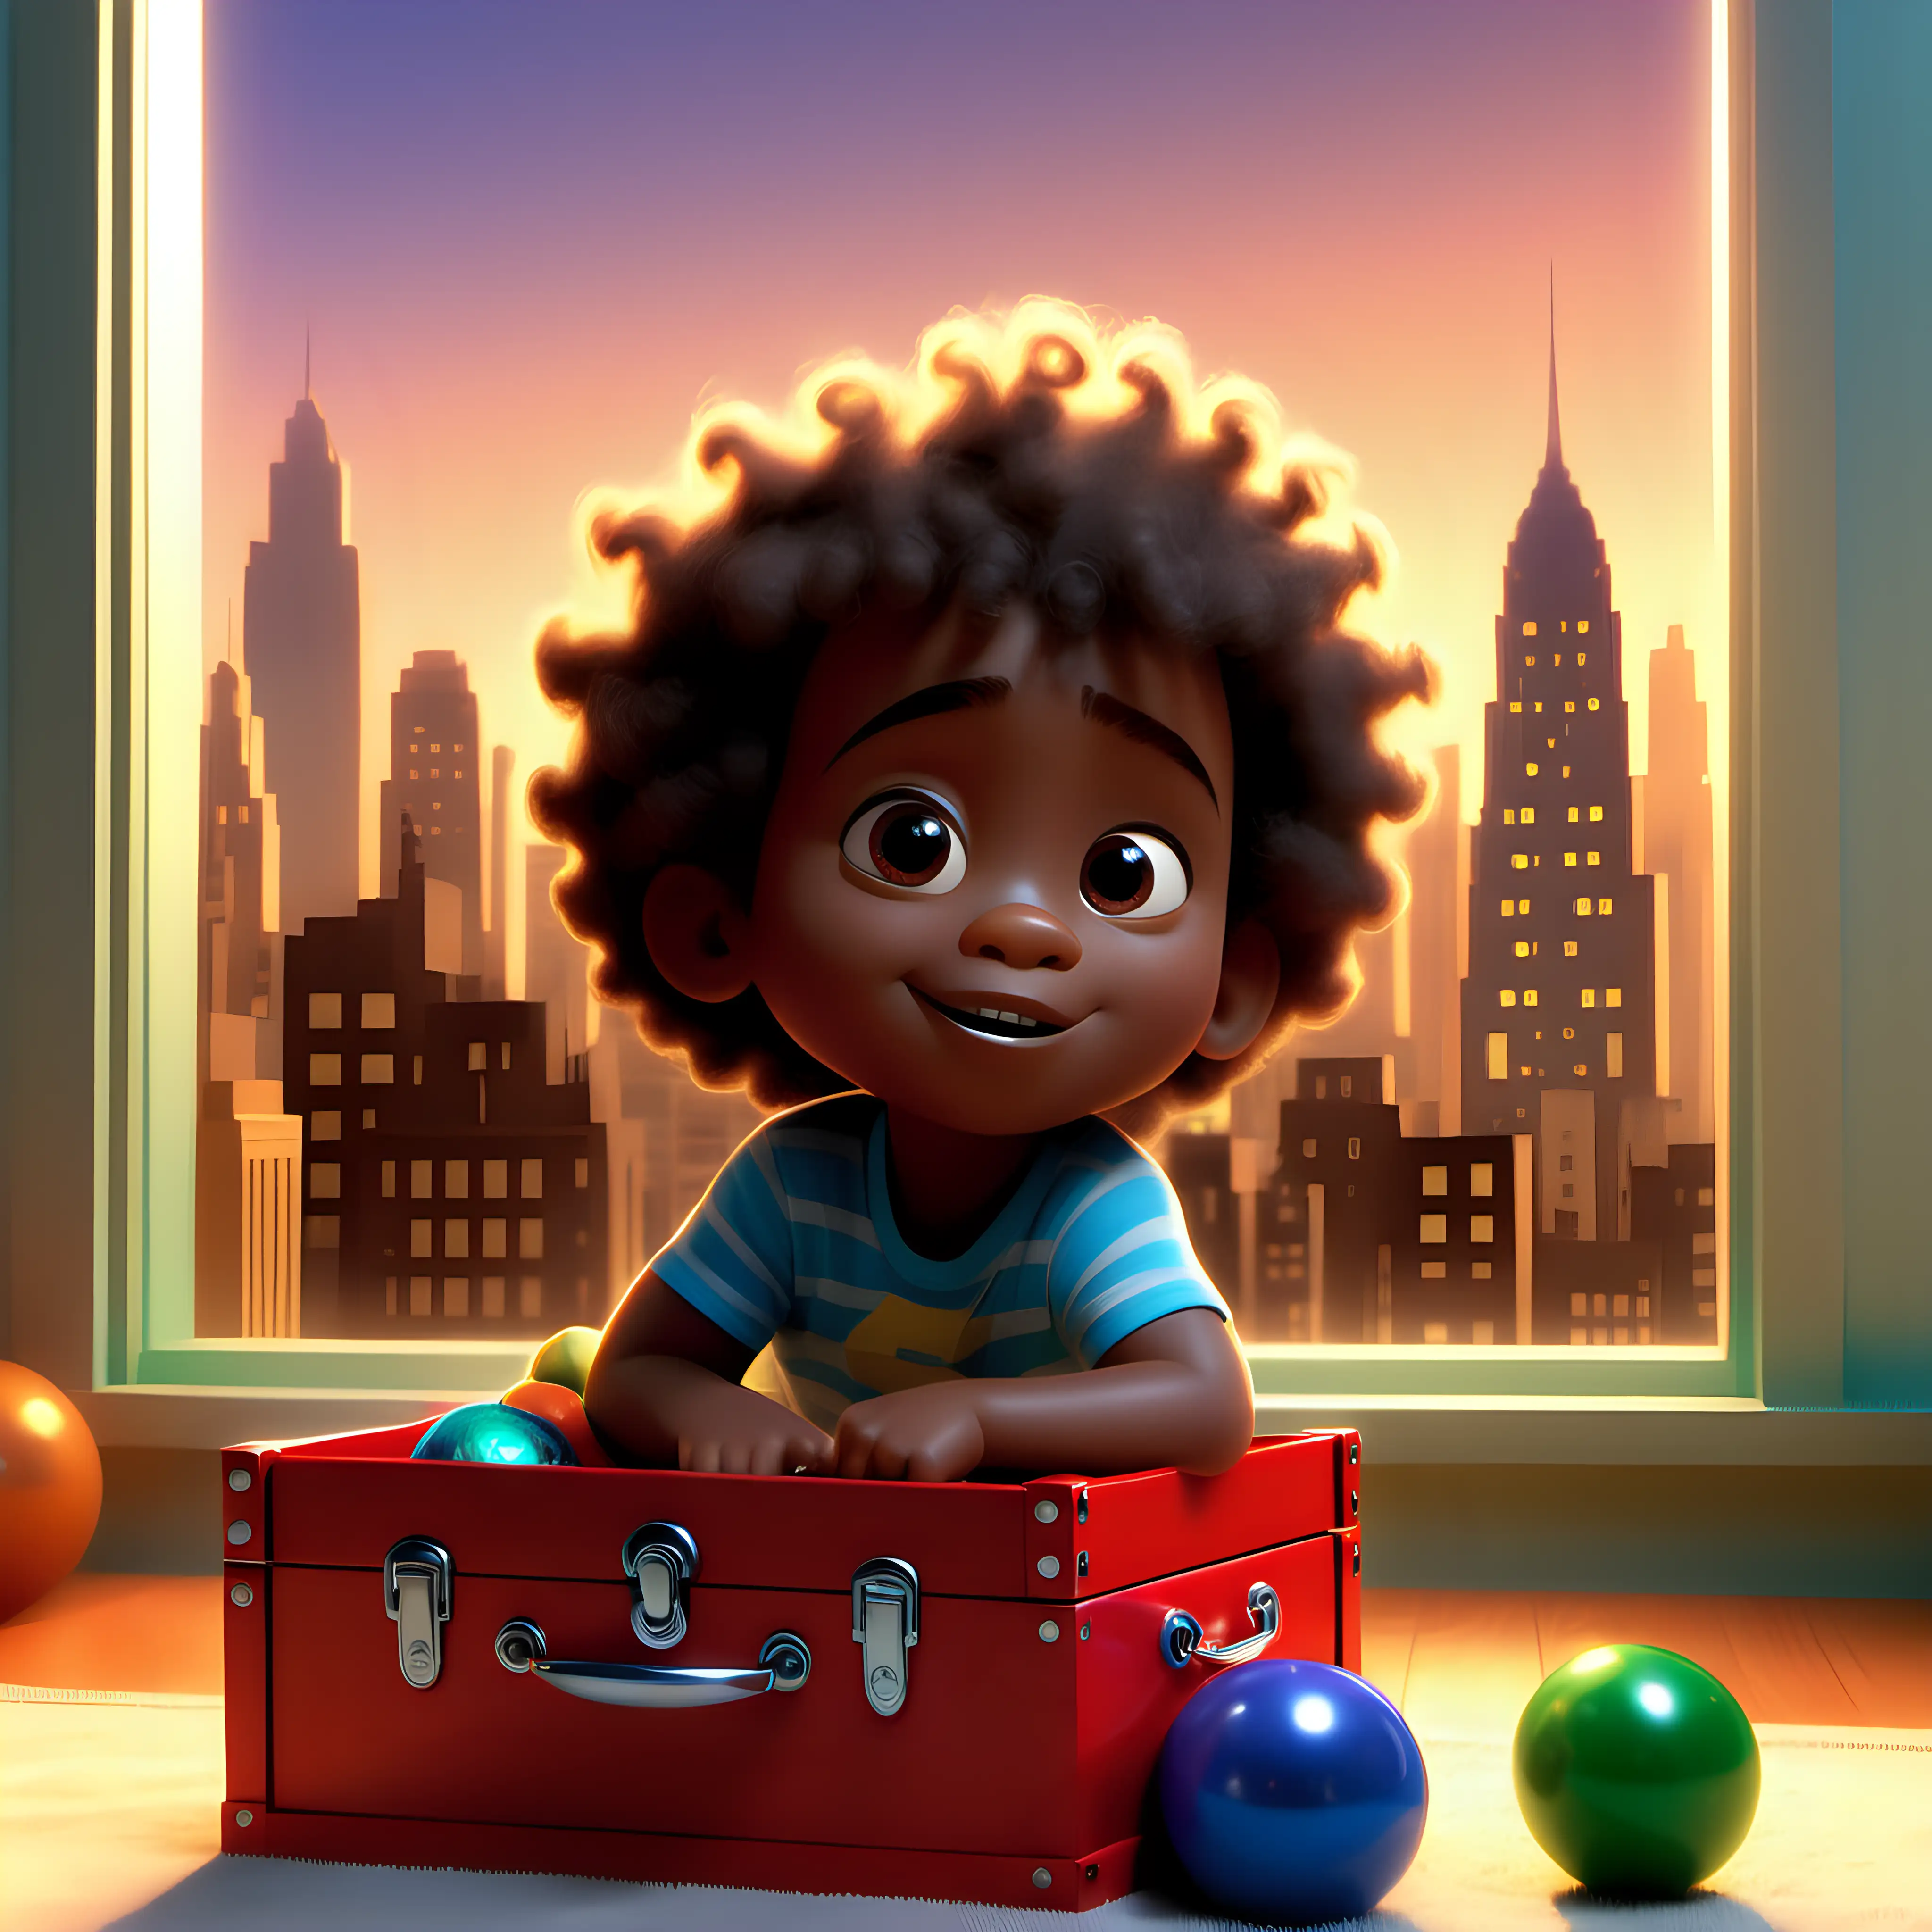 Prompt 1: African American boy named Amir with medium length curly hair aged 1 years old that lives in a big city and is gifted a shiny magical toy chest as an early gift for his 2nd birthday that’s 3 months away that’s takes him on an adventure into a toy land where he discovers he has super powers, In his play room at his home in a big city, Pixar 3D  Prompt 2: African American boy named Amir with medium length curly hair aged 1 years old that lives in a big city and is gifted a shiny magical toy chest as an early gift for his 2nd birthday that’s 3 months away that’s takes him on an adventure into a toy land where he discovers he has super powers, Sitting in a sunlit playroom surrounded by towering skyscrapers visible through a large window, With the golden light of sunset filling the room, Pixar 3D  Prompt 3: African American boy named Amir with medium length curly hair aged 1 years old that lives in a big city and is gifted a shiny magical toy chest as an early gift for his 2nd birthday that’s 3 months away that’s takes him on an adventure into a toy land where he discovers he has super powers, In a cozy corner of his playroom, under a stream of morning light coming through a high-rise apartment window, Morning, Pixar 3D  Prompt 4: African American boy named Amir with medium length curly hair aged 1 years old that lives in a big city and is gifted a shiny magical toy chest as an early gift for his 2nd birthday that’s 3 months away that’s takes him on an adventure into a toy land where he discovers he has super powers, In the middle of his cluttered, toy-filled playroom, with a view of the bustling city night through his window, Night, Pixar 3D